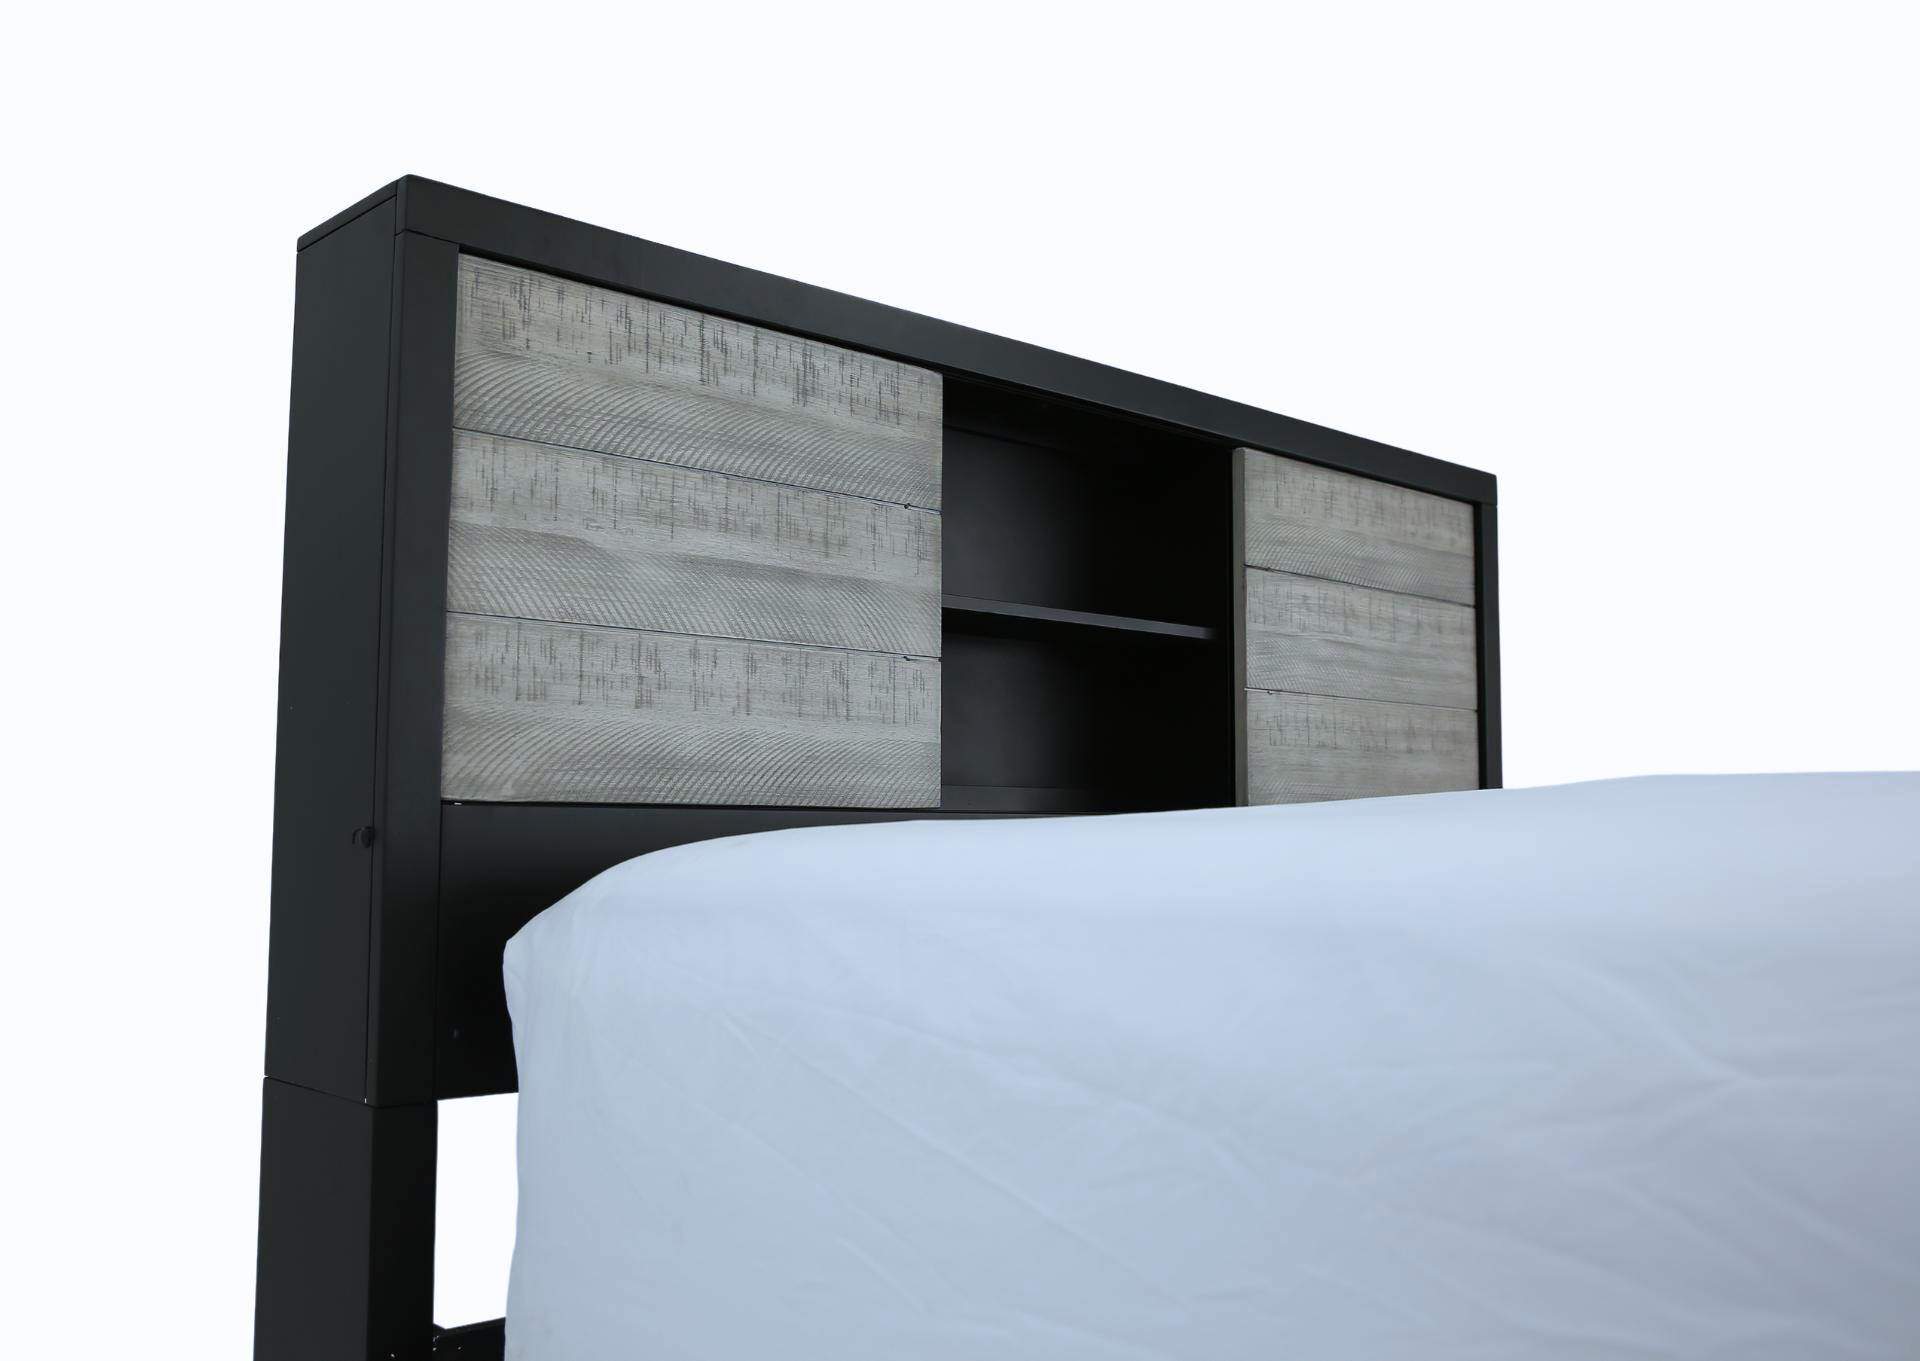 DAUGHTREY BLACK KING BOOKCASE BED,AUSTIN GROUP